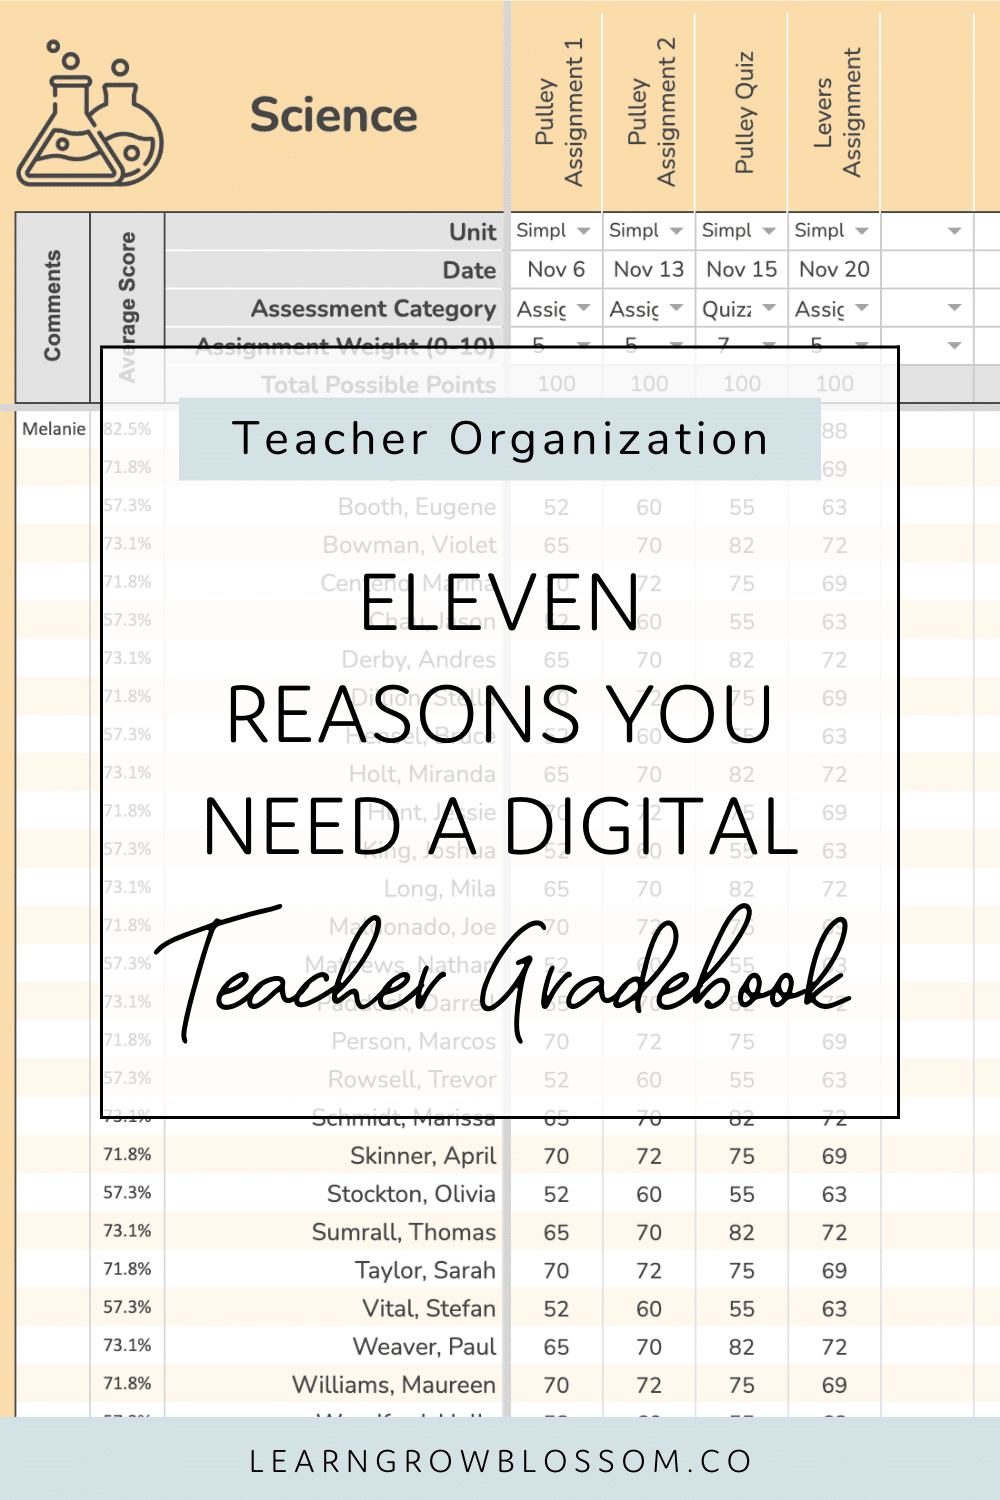 Pin title reads "eleven reasons you need a digital teacher gradebook template" over a screenshot of the Science tab of the teacher gradebook in Google Sheets